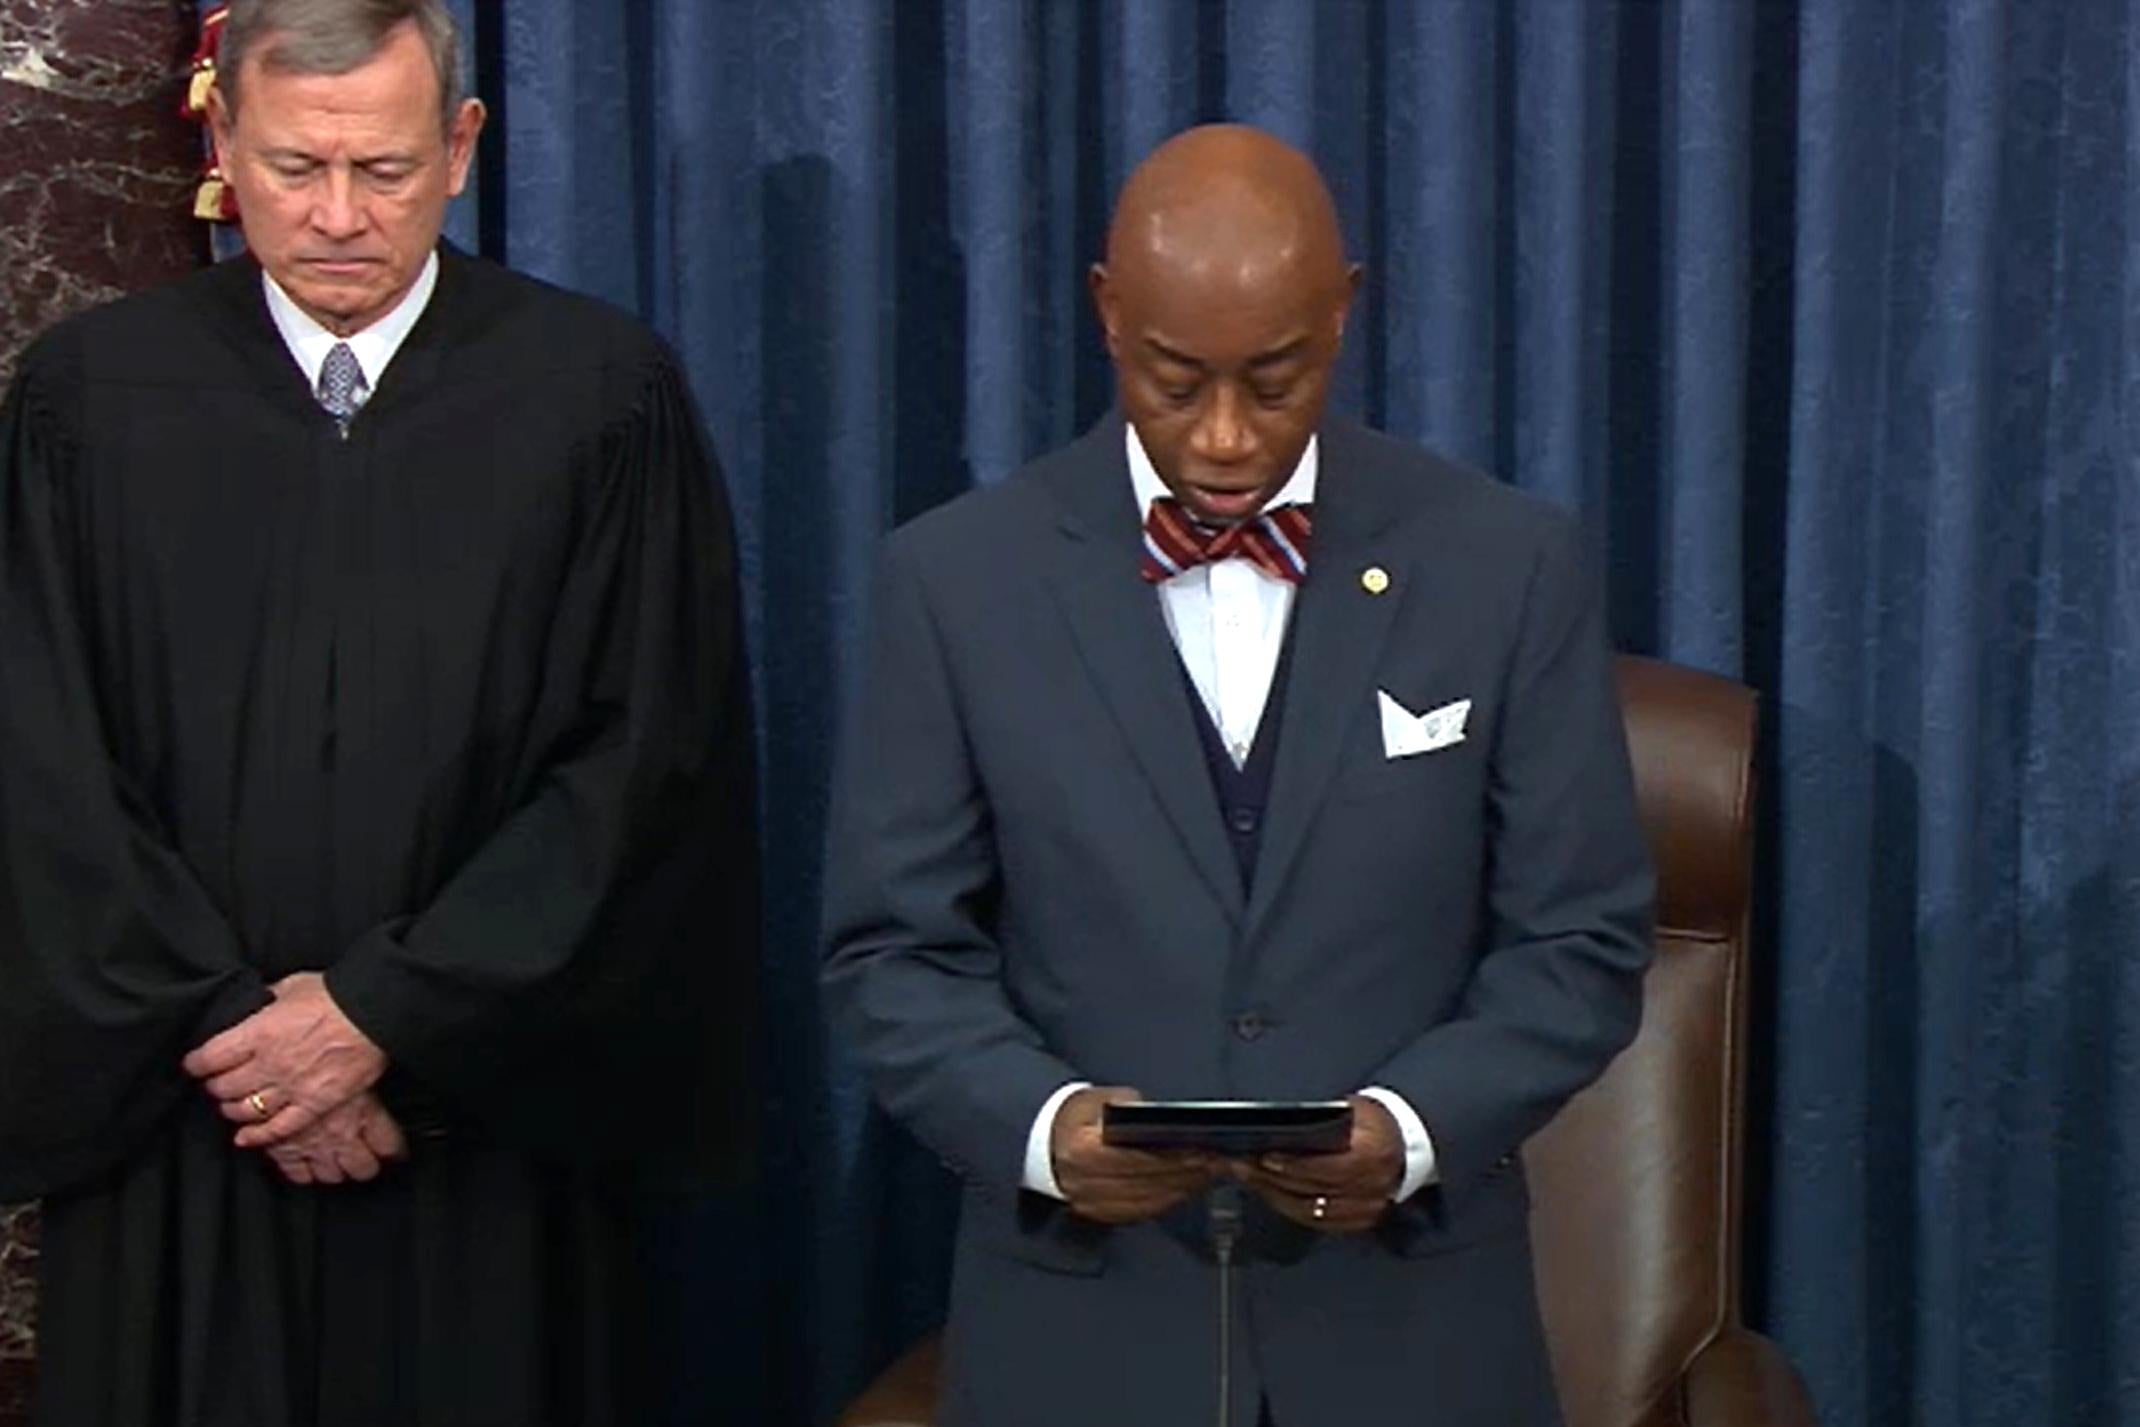 Roberts bows his head as Black reads from a book.